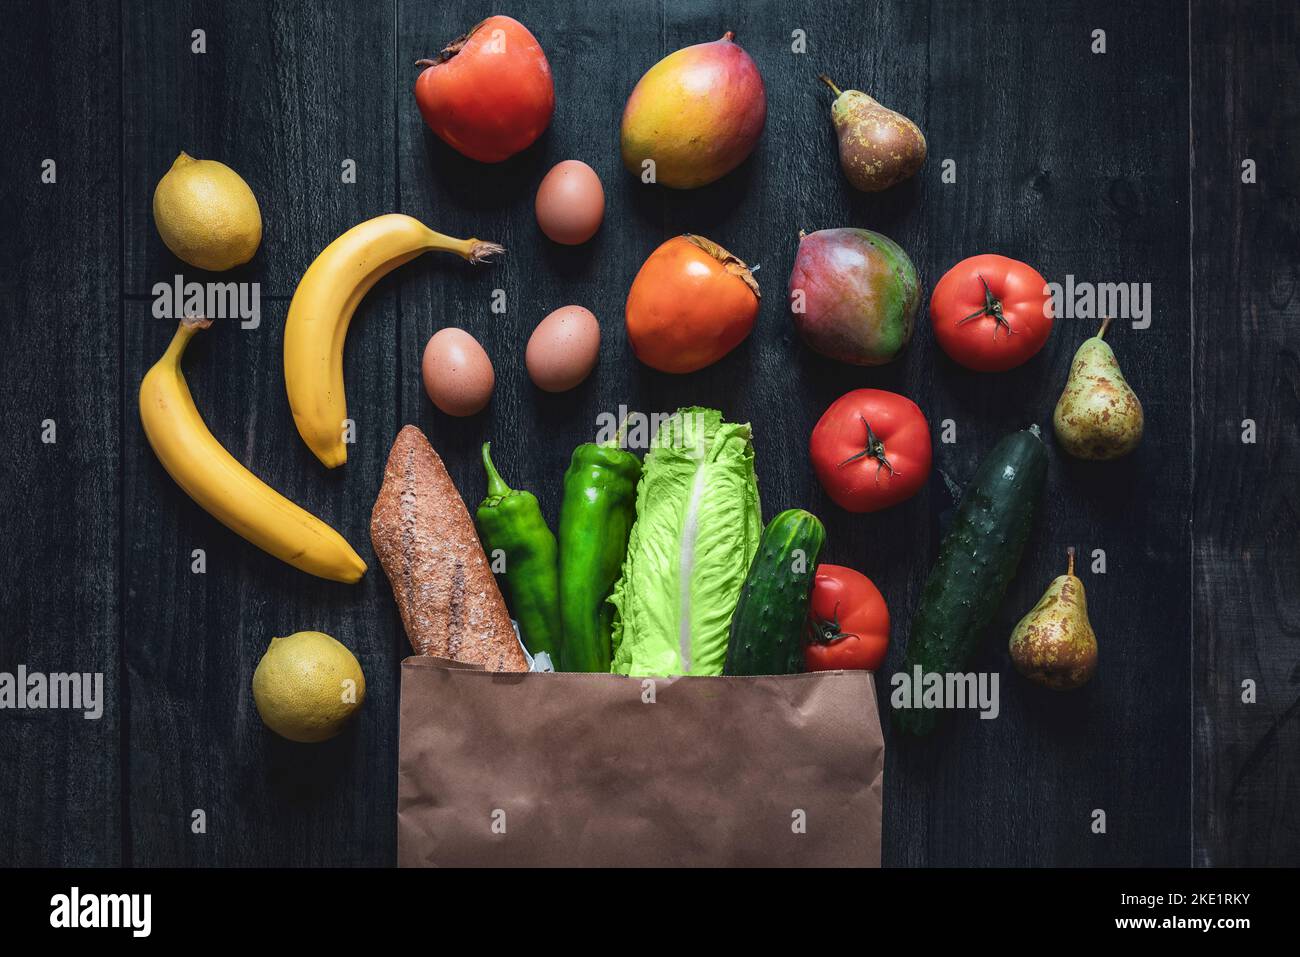 Shopping bag full of vegetables, fruits, eggs and bread on wooden background. Dark food photography. Rising prices of basic foodstuffs Stock Photo